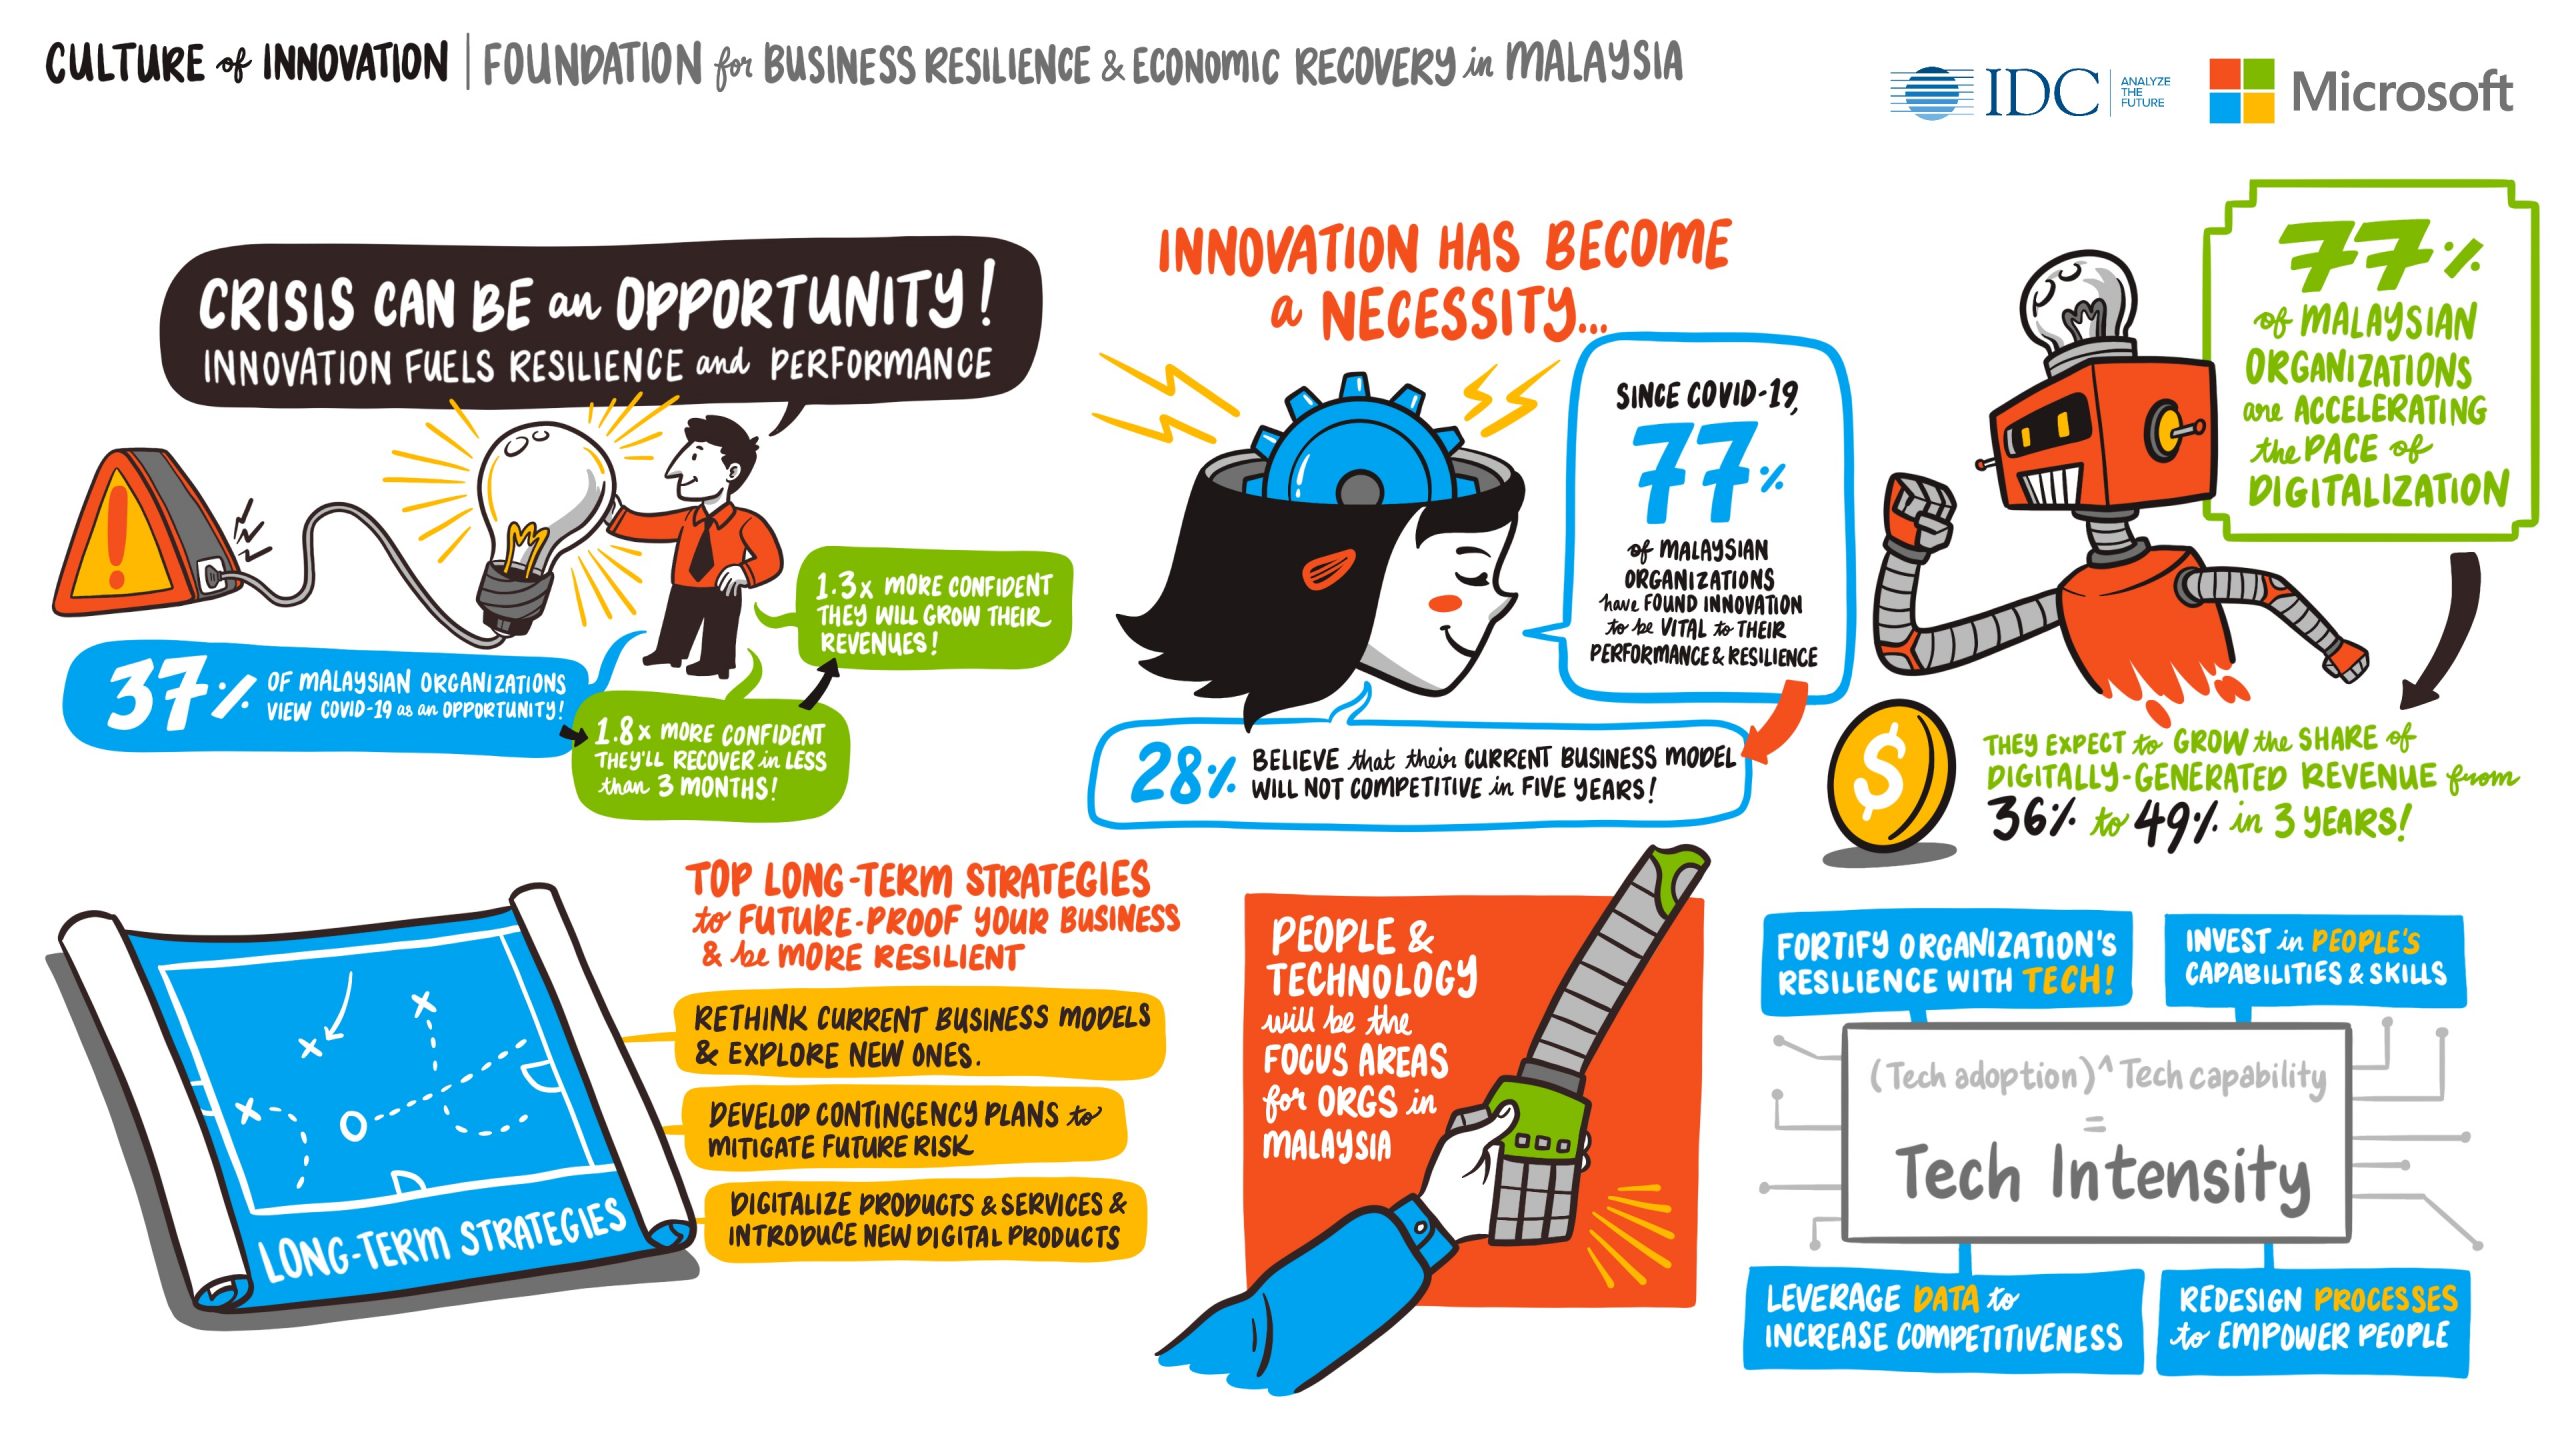 Culture of Innovation Infographic